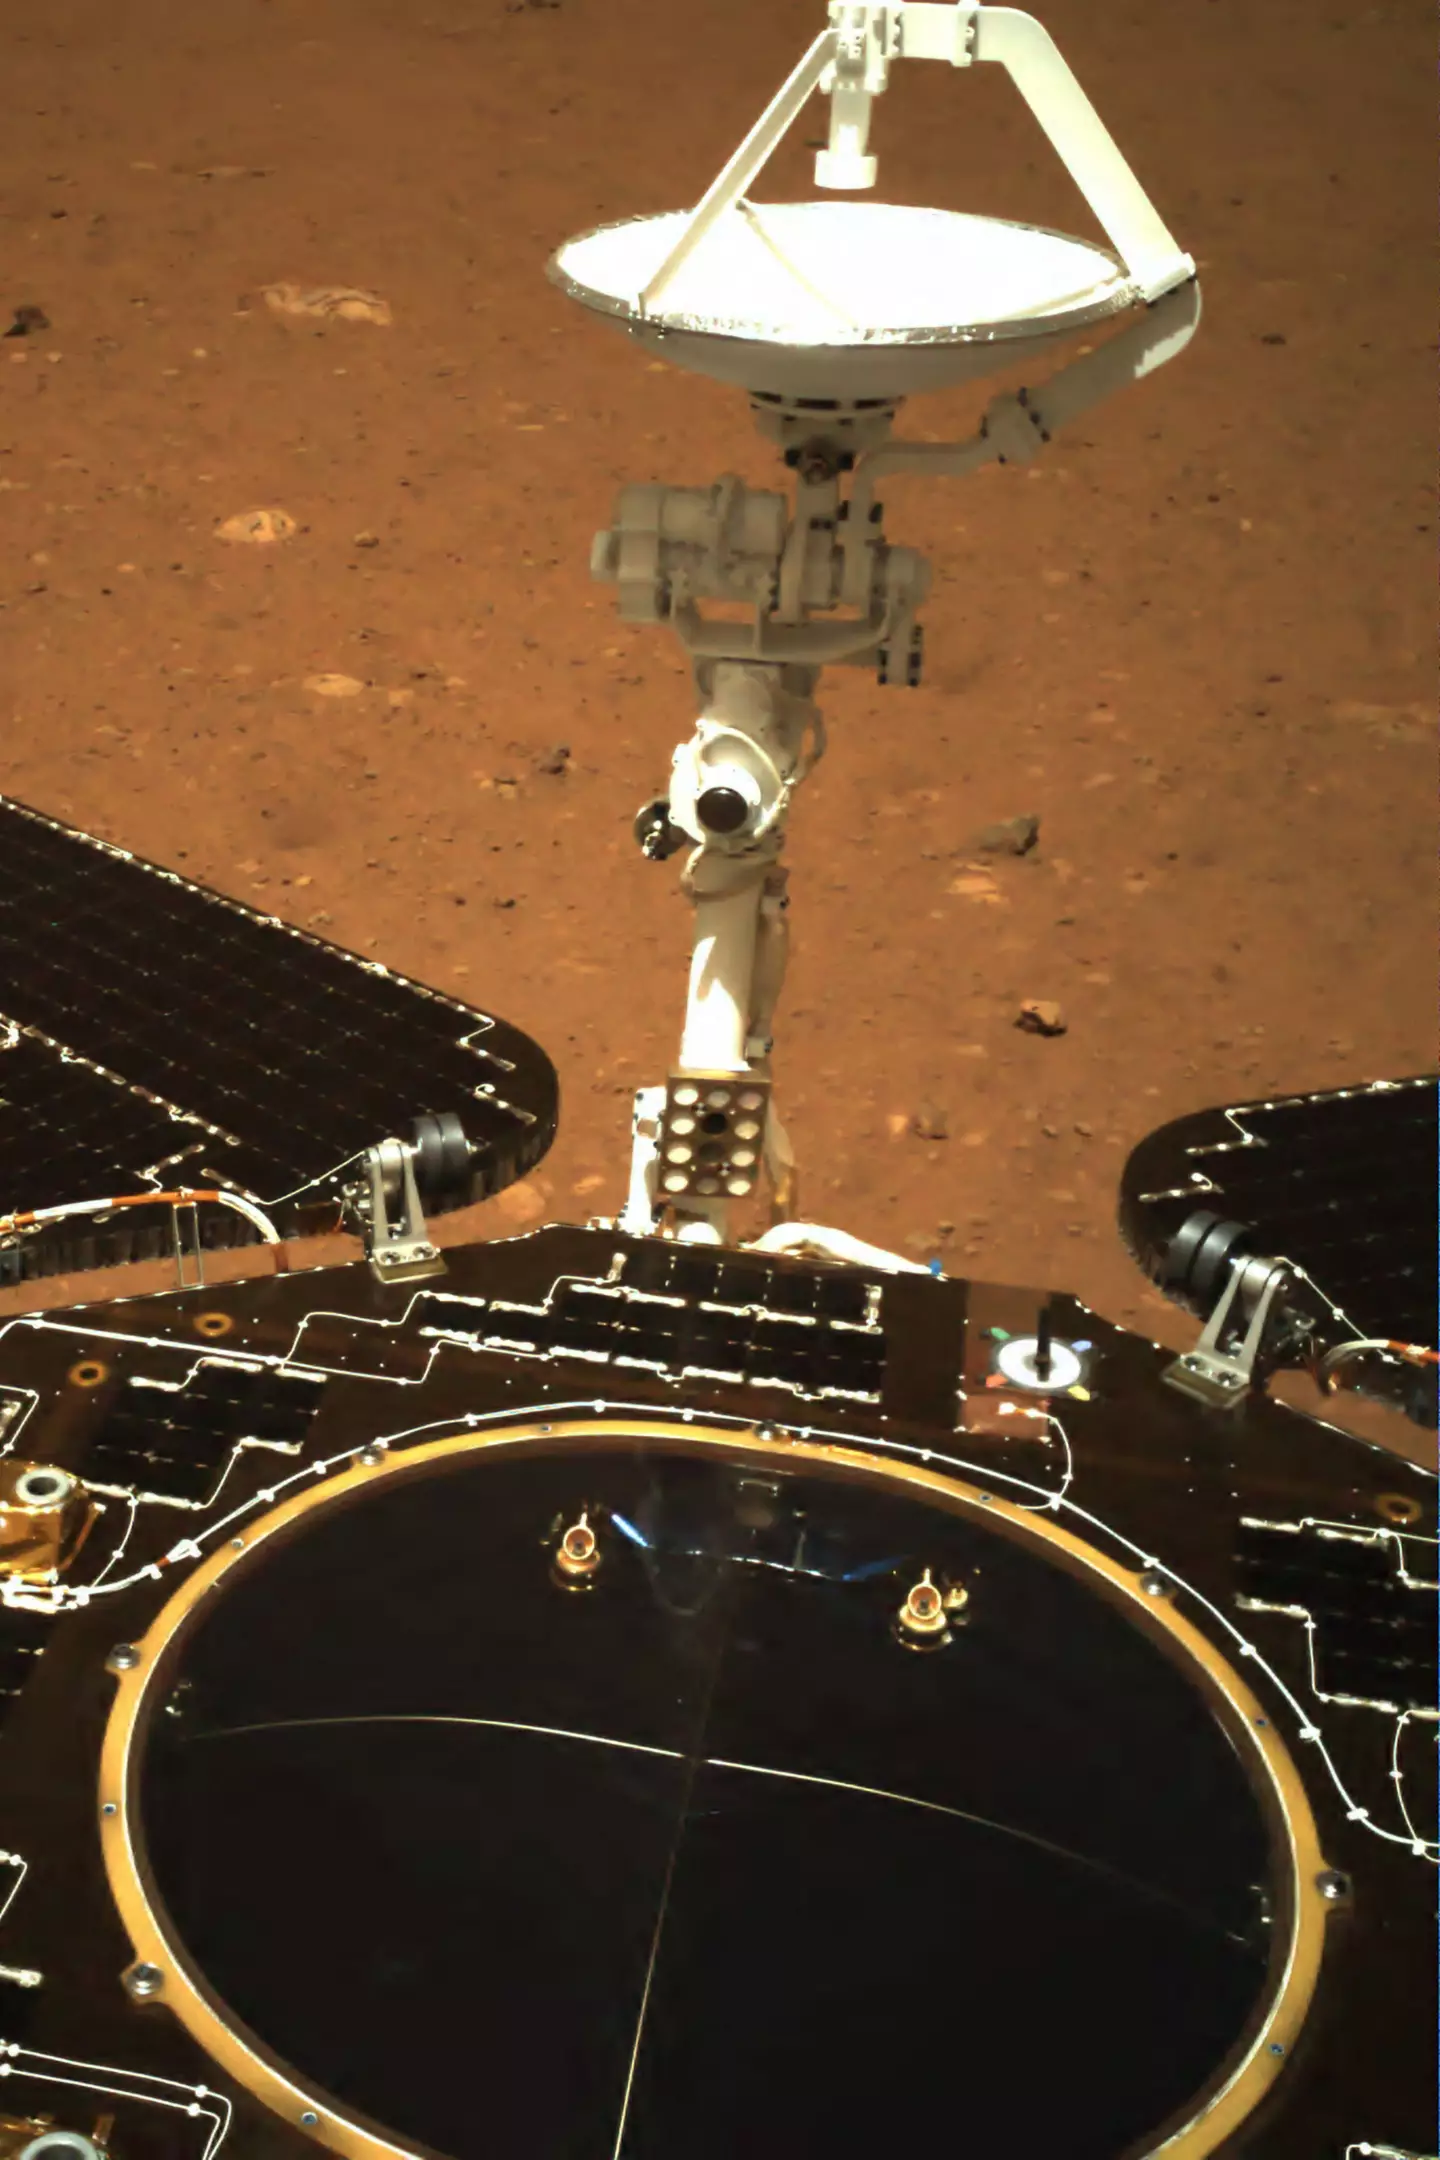 The Zhurong rover on the surface of Mars. (CNS/CNSA/AFP via Getty Images)